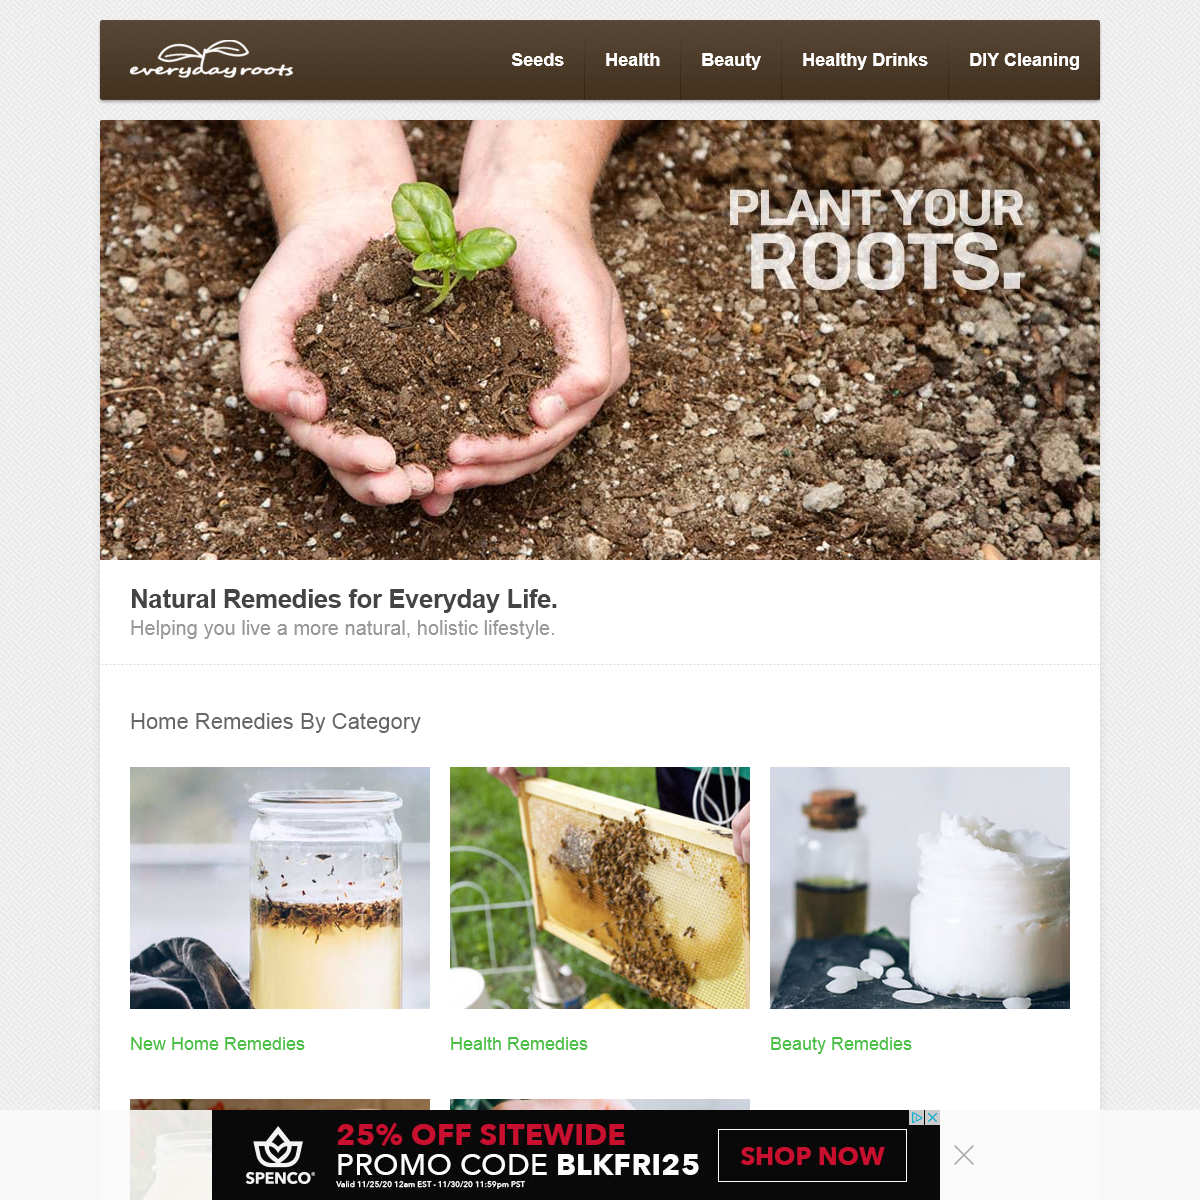 A complete backup of everydayroots.com